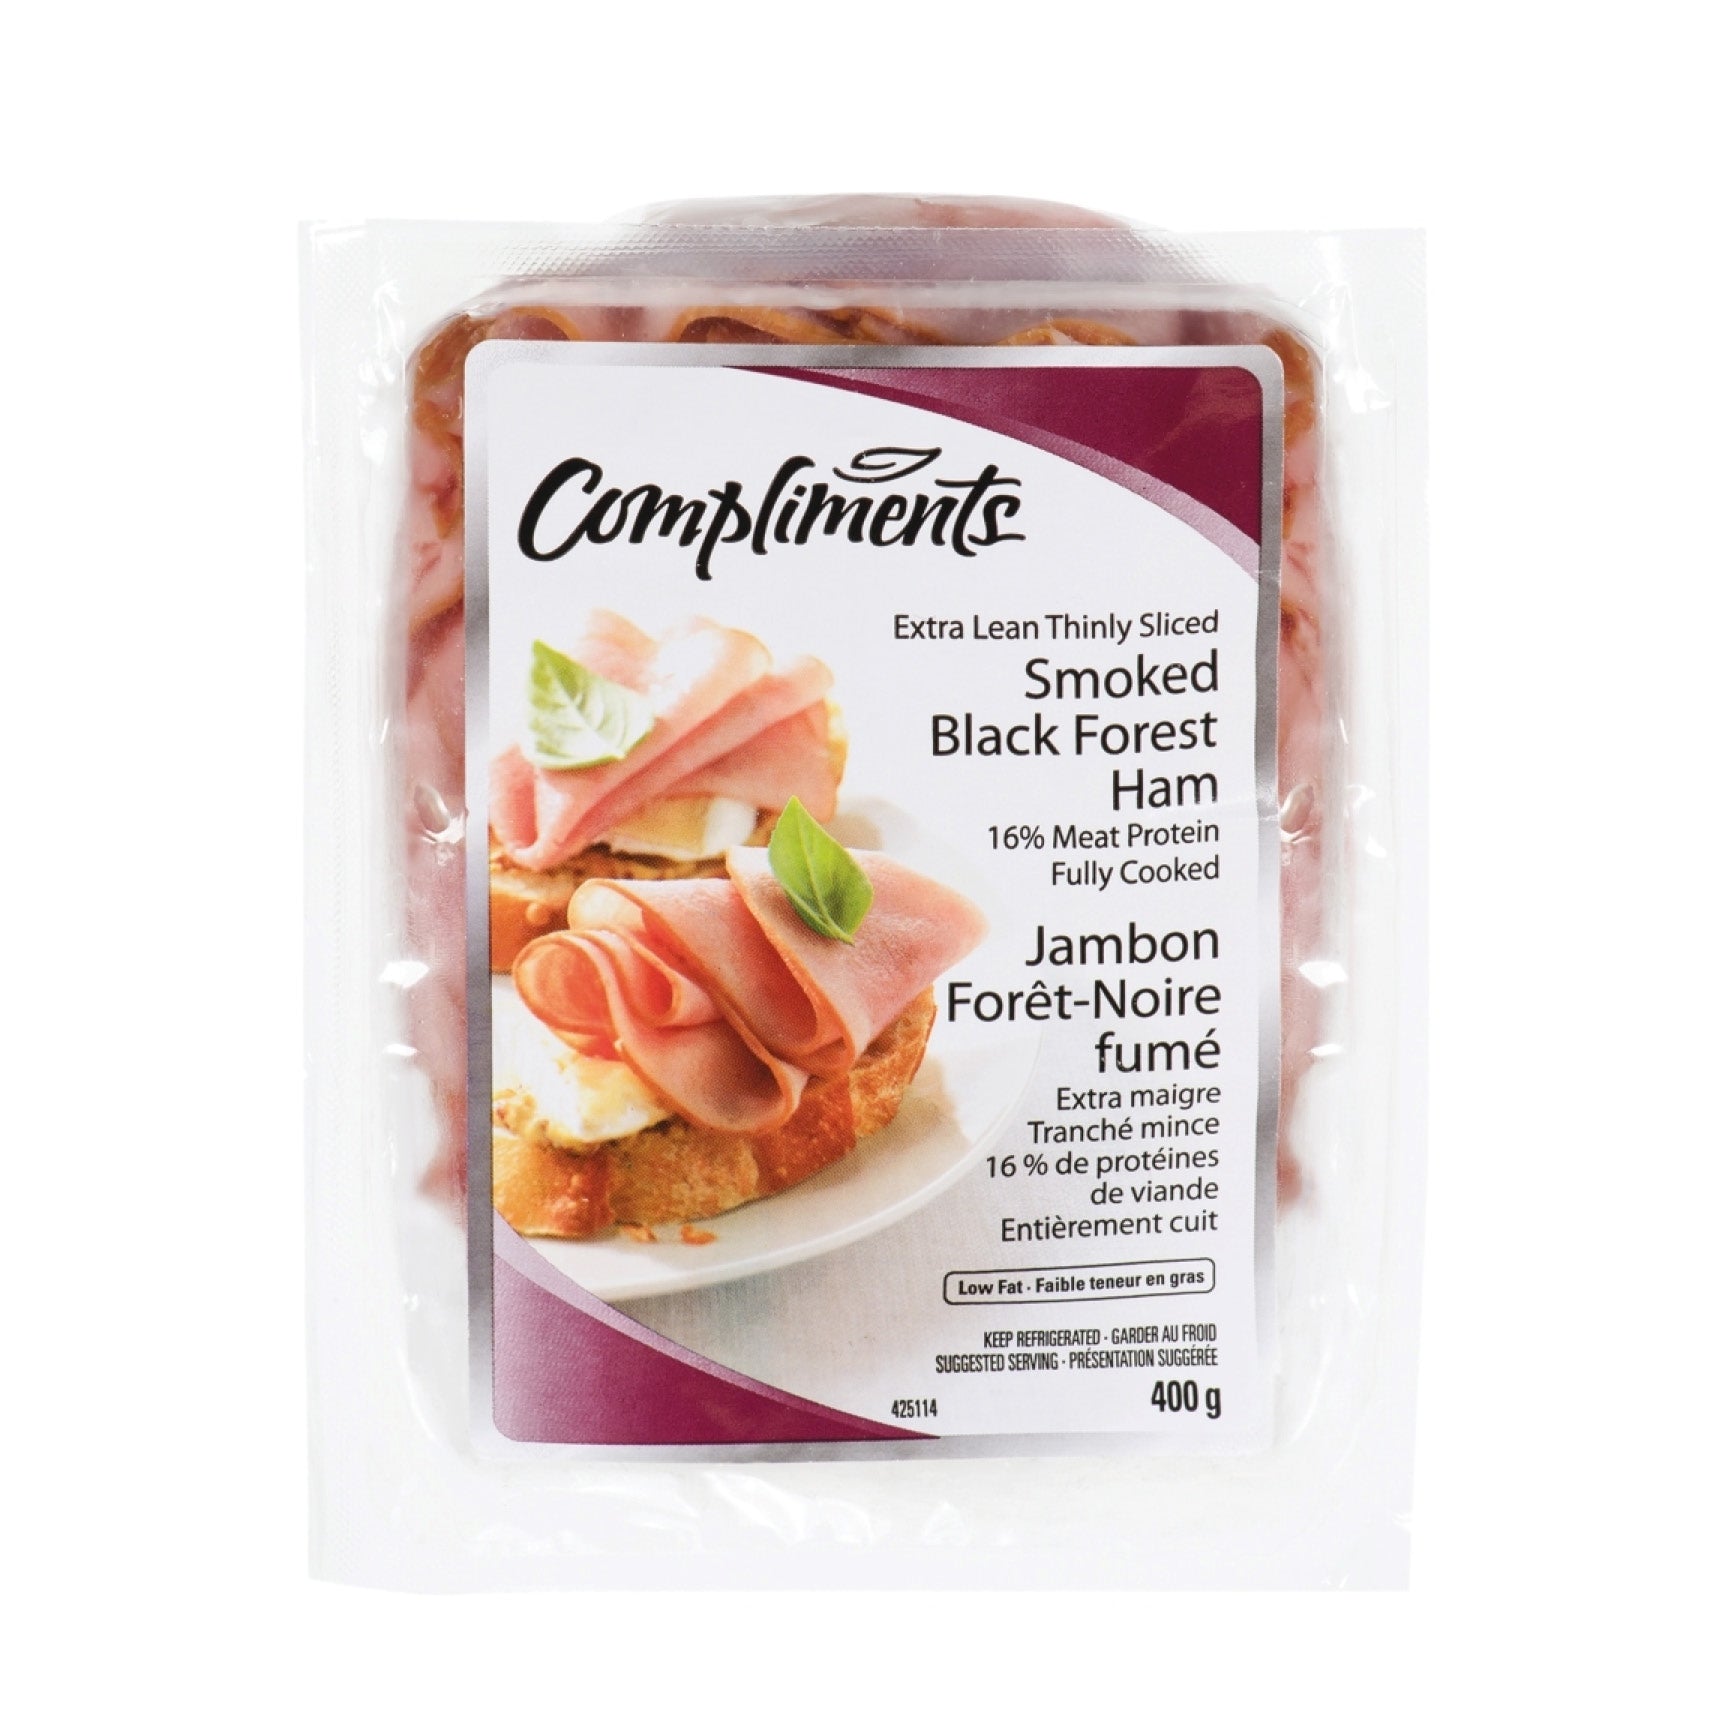 Compliments Ham, Black Forest Smoked, Extra Lean, Thinly Sliced, 400g